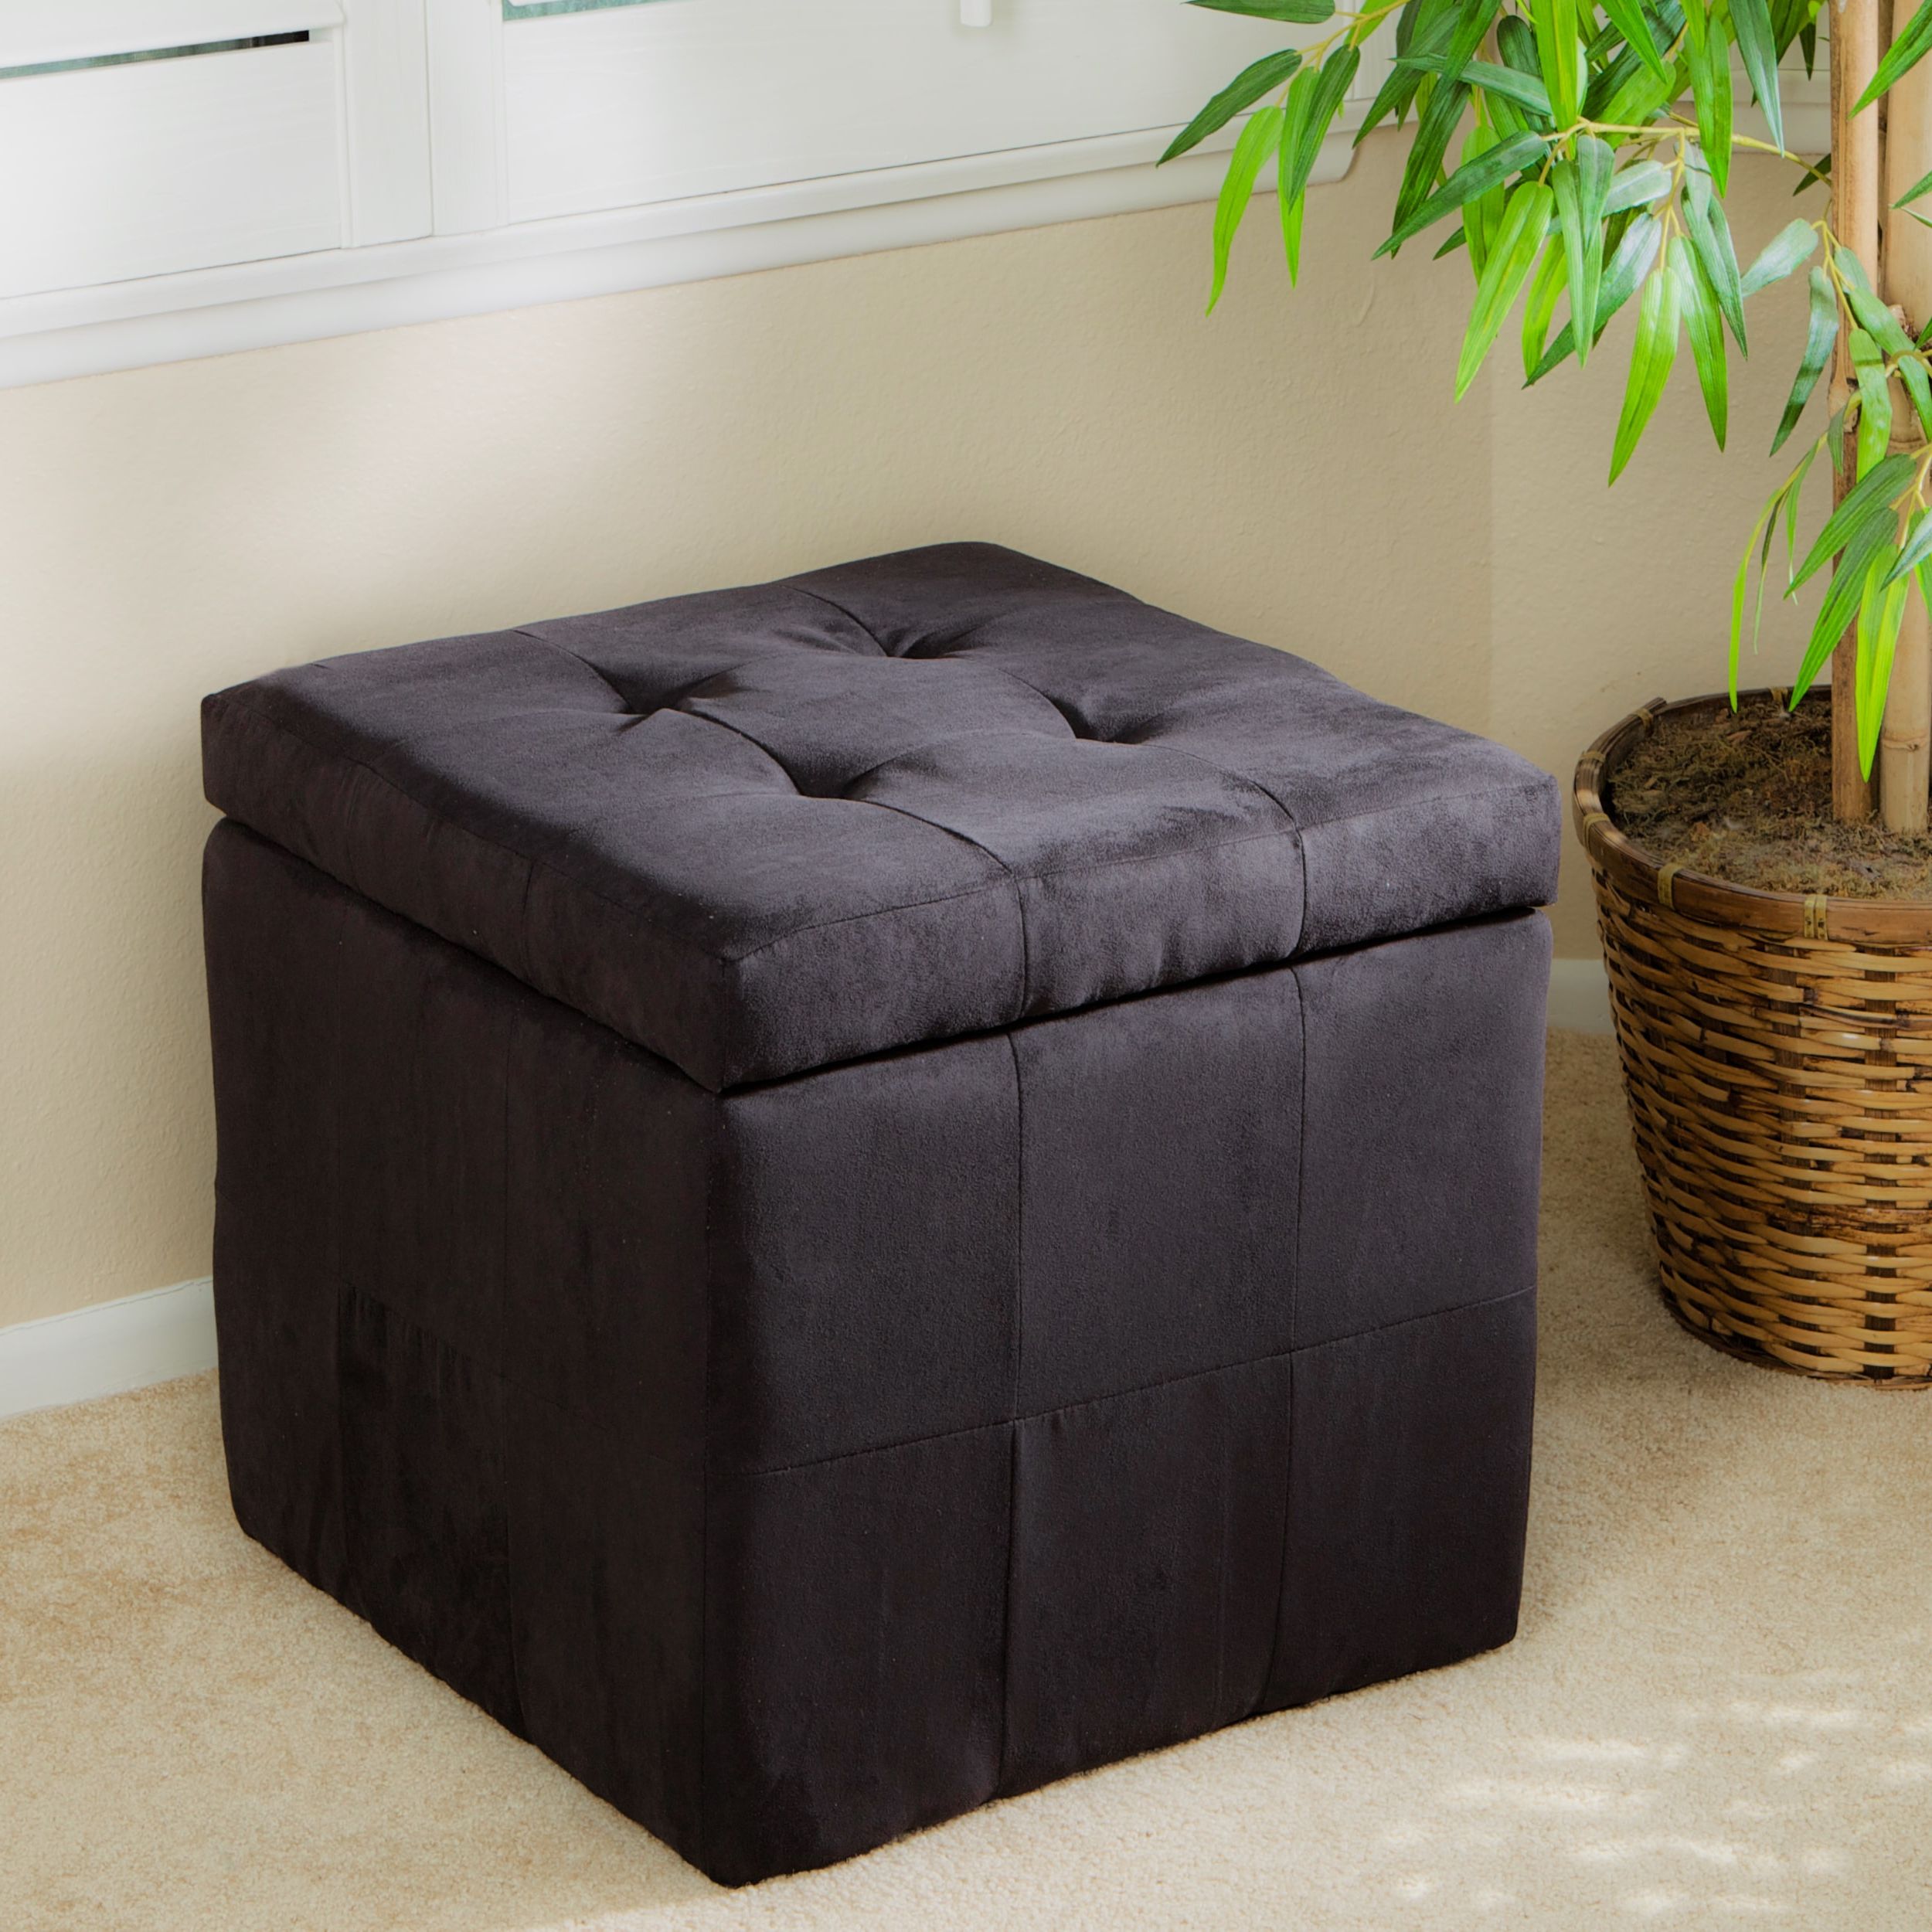 Tufted Black Fabric Storage Cube Ottoman – 13915122 – Overstock Intended For Trendy Brown Fabric Tufted Surfboard Ottomans (View 2 of 10)